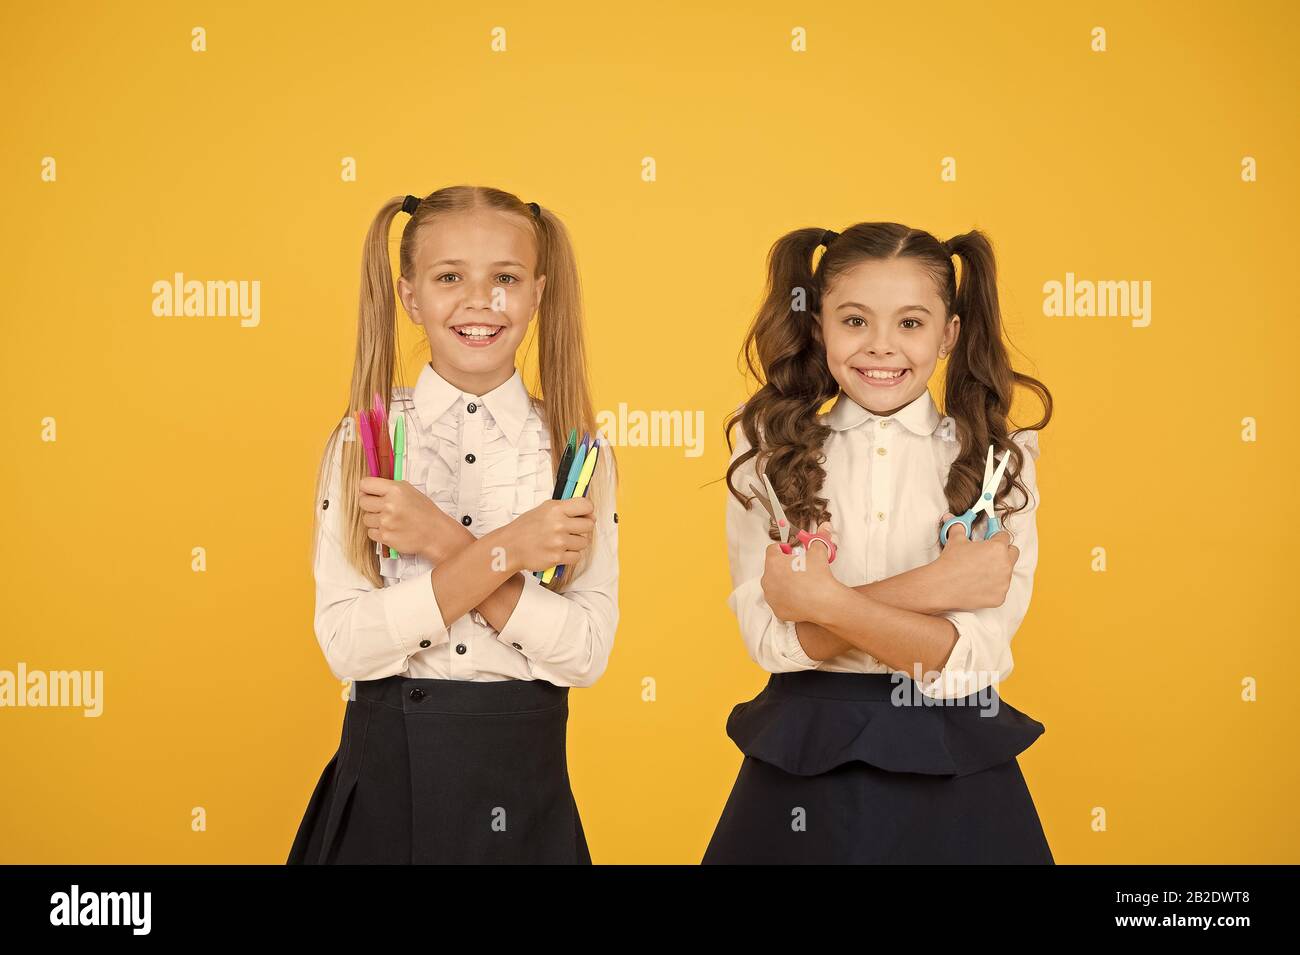 Inspire your children to get creative. Happy children holding scissors and markers. Little children smiling with handy tools on yellow background. Arts and crafts activities for small children. Stock Photo